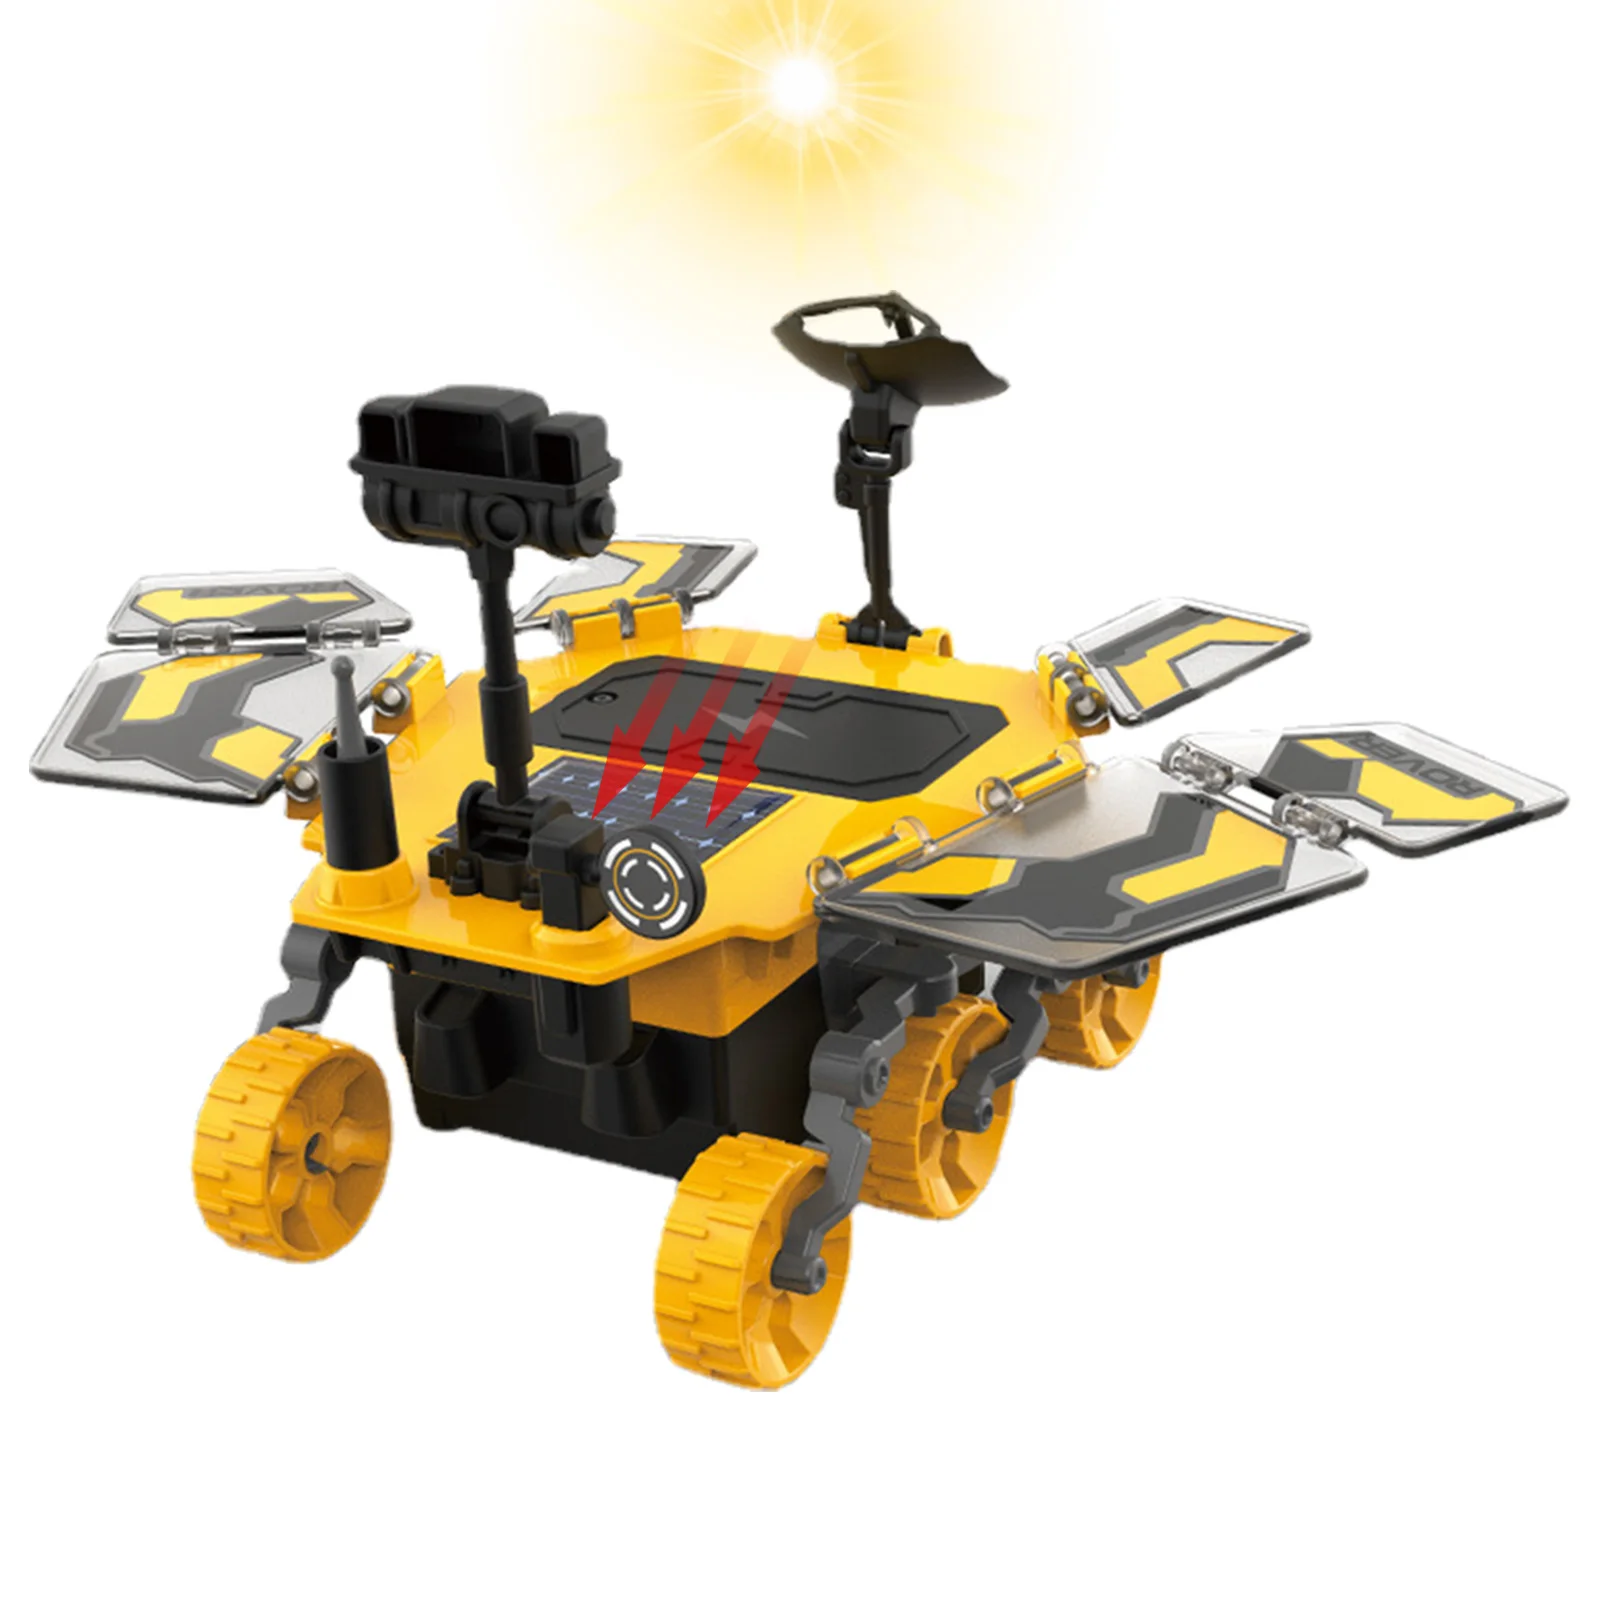 

Robot Kit Robot Building Kit Solar And Battery Powered Dual Drive Motor Assembled Mars Rover Kids Science Kits Age 7-14 Exclude